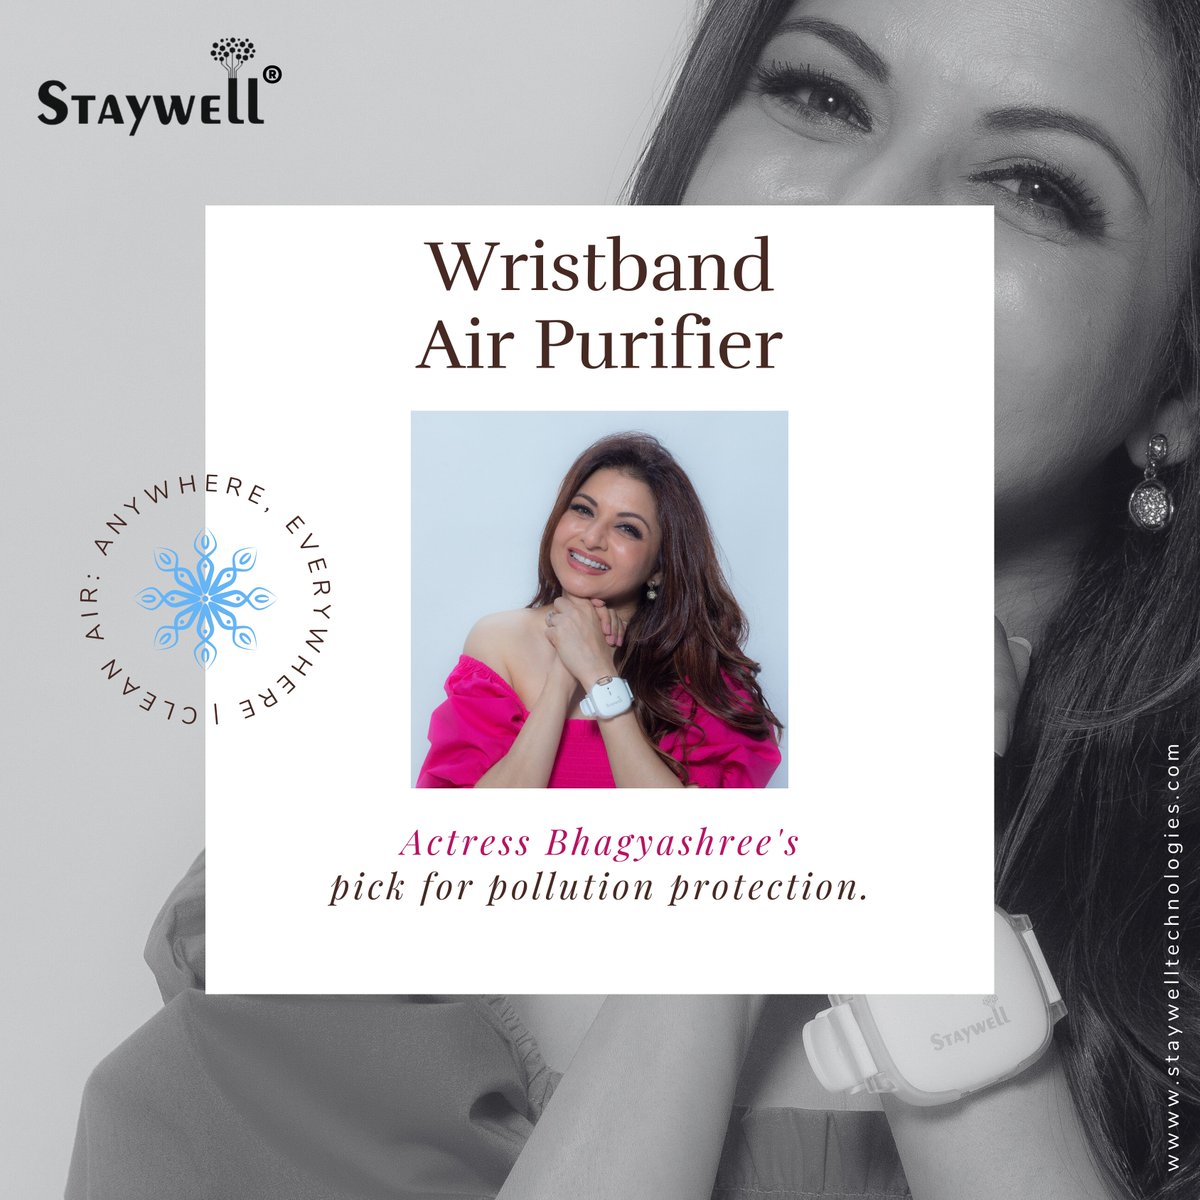 'Introducing the Staywell Wristband Air Purifier – the ultimate pollution protection endorsed by actress Bhagyashree herself! Stay safe, stay stylish, and breathe easy with this revolutionary tech on your wrist. Don't just survive, thrive in any environment!'

#airpurifier